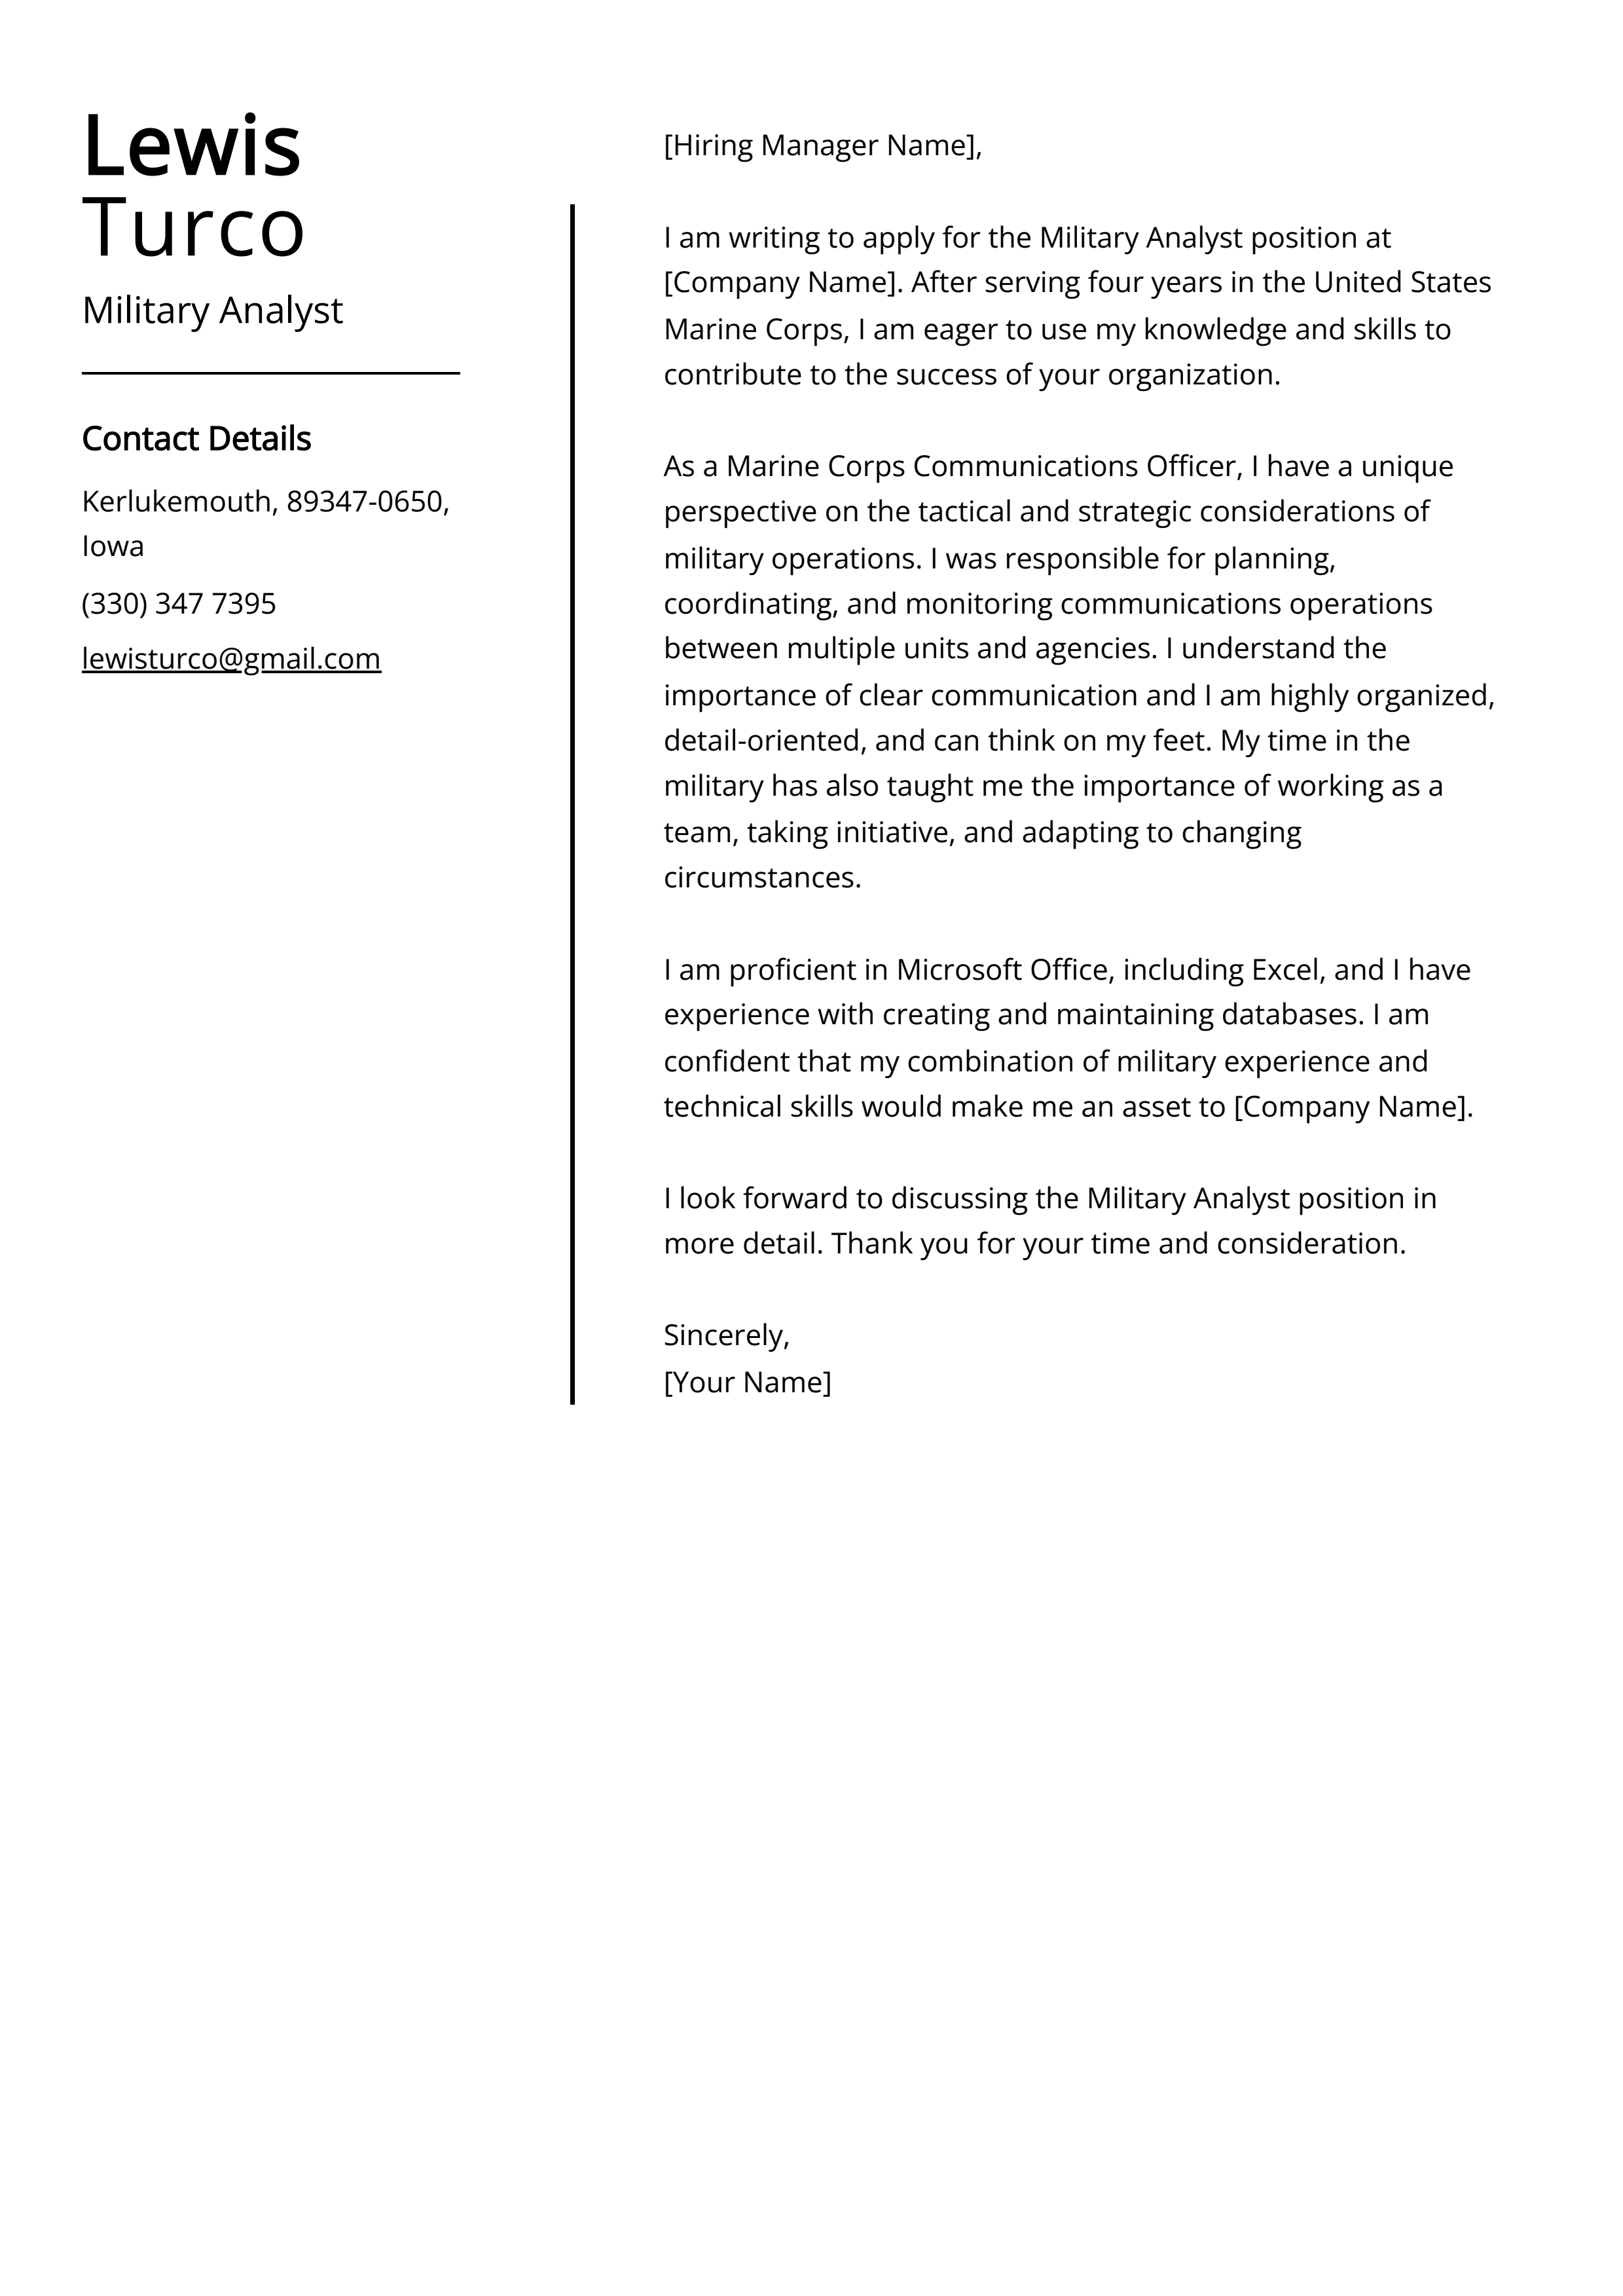 Military Analyst Cover Letter Example